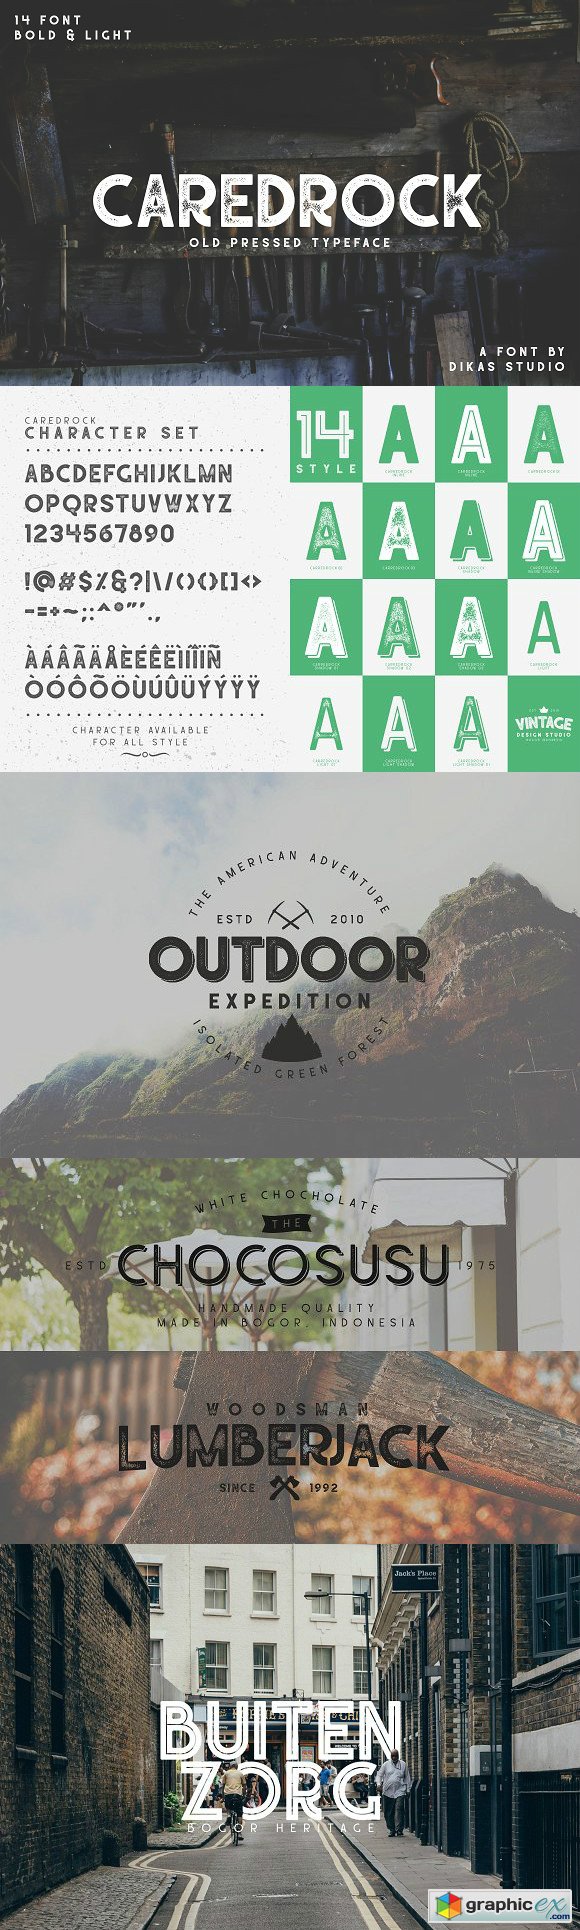 Caredrock - 14 Fonts Style + Extras